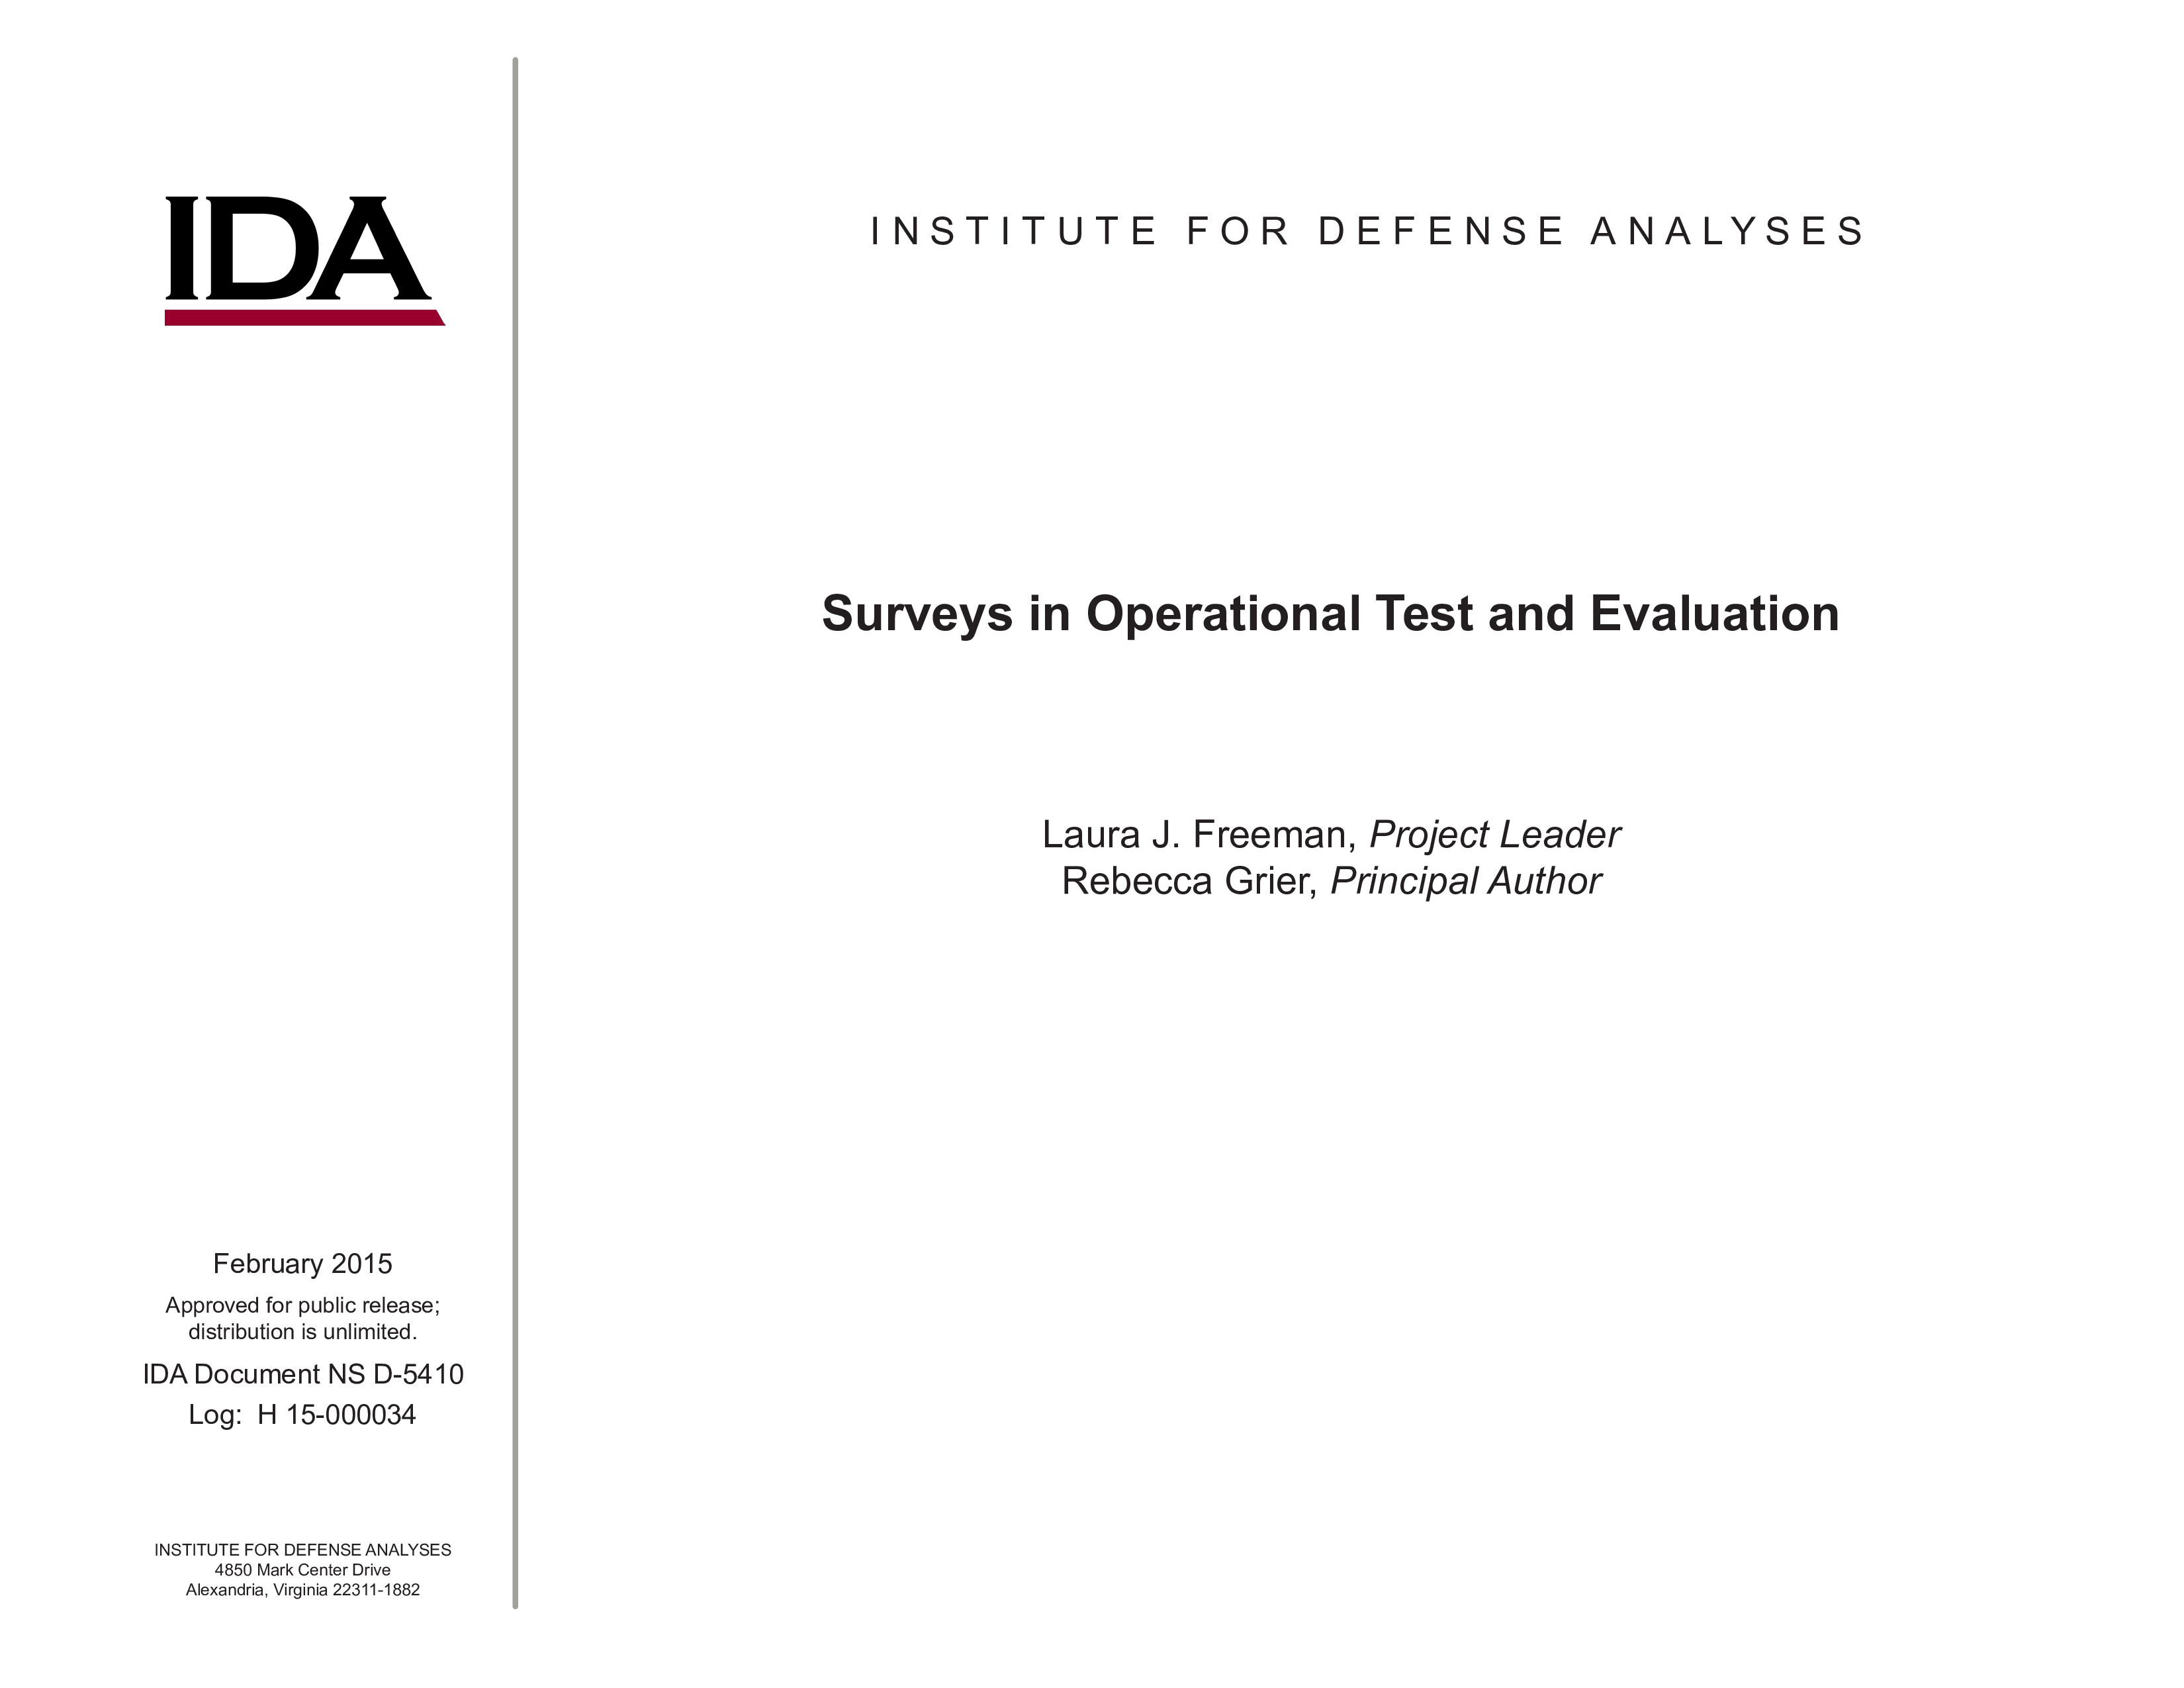 Surveys in Operational Test and Evaluation image cover